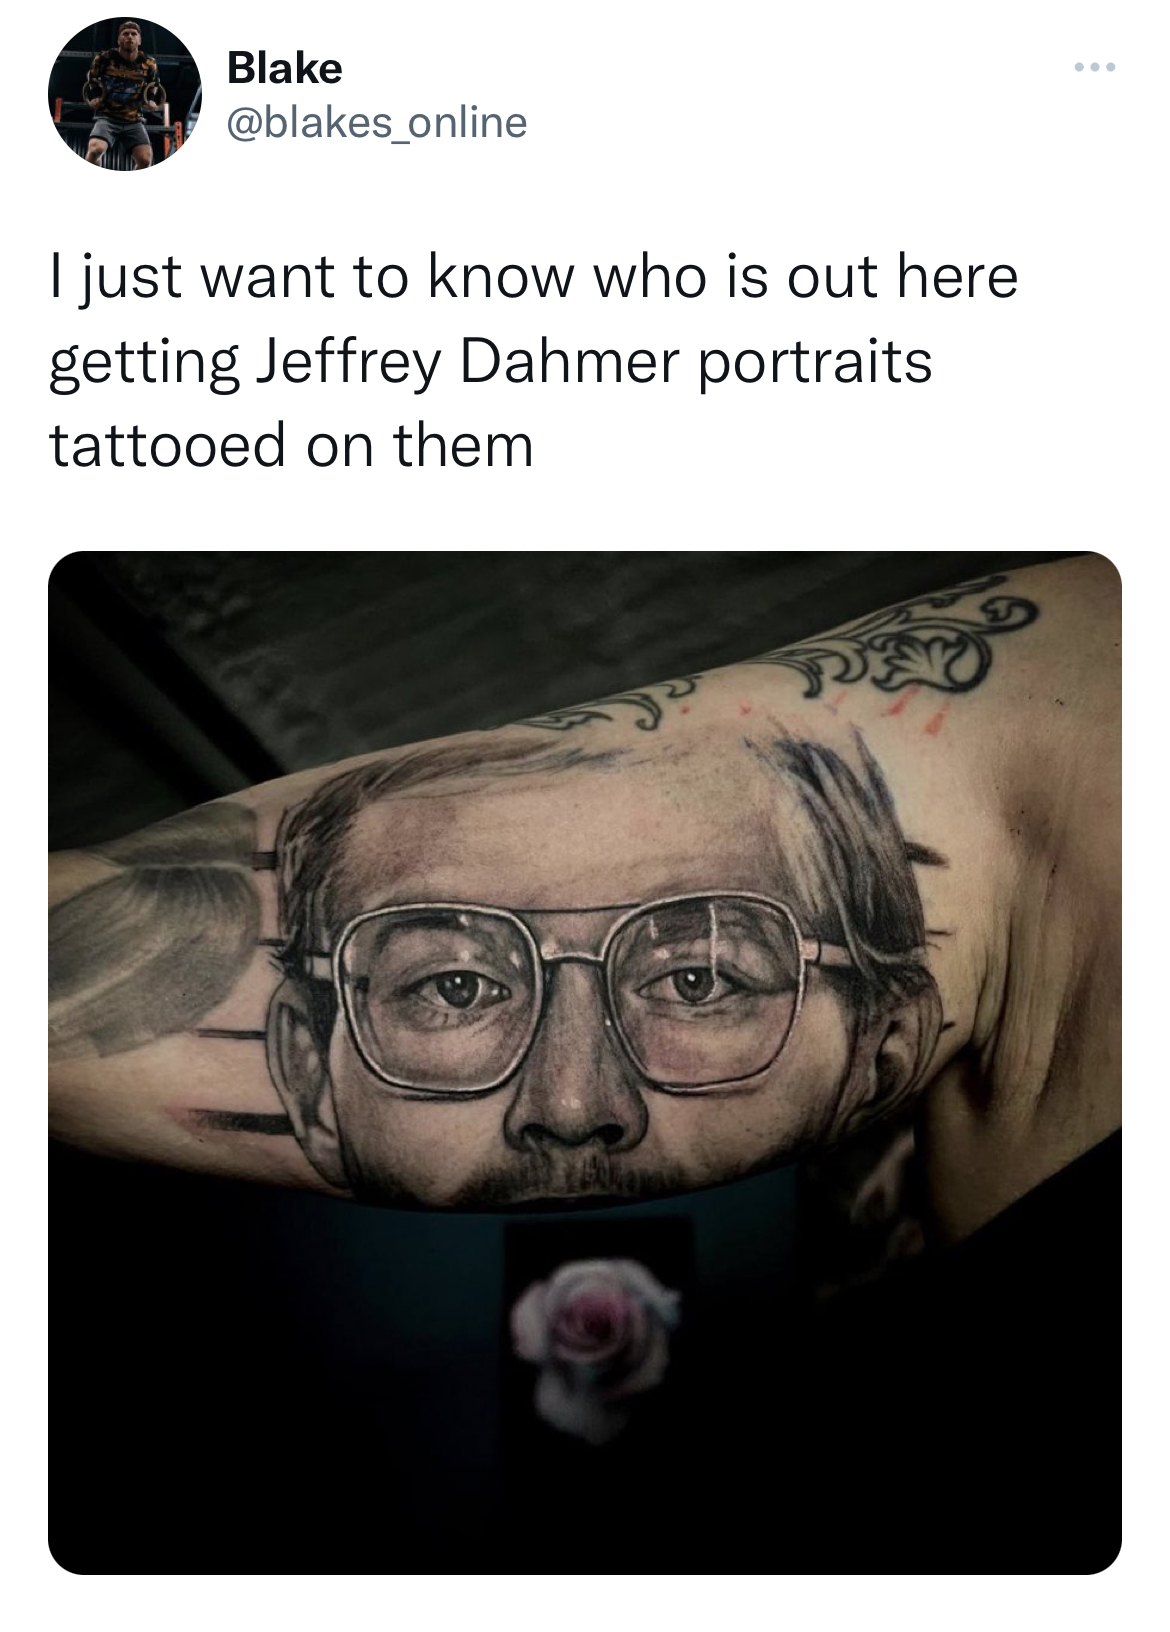 Savage Tweets - glasses - Blake I just want to know who is out here getting Jeffrey Dahmer portraits tattooed on them